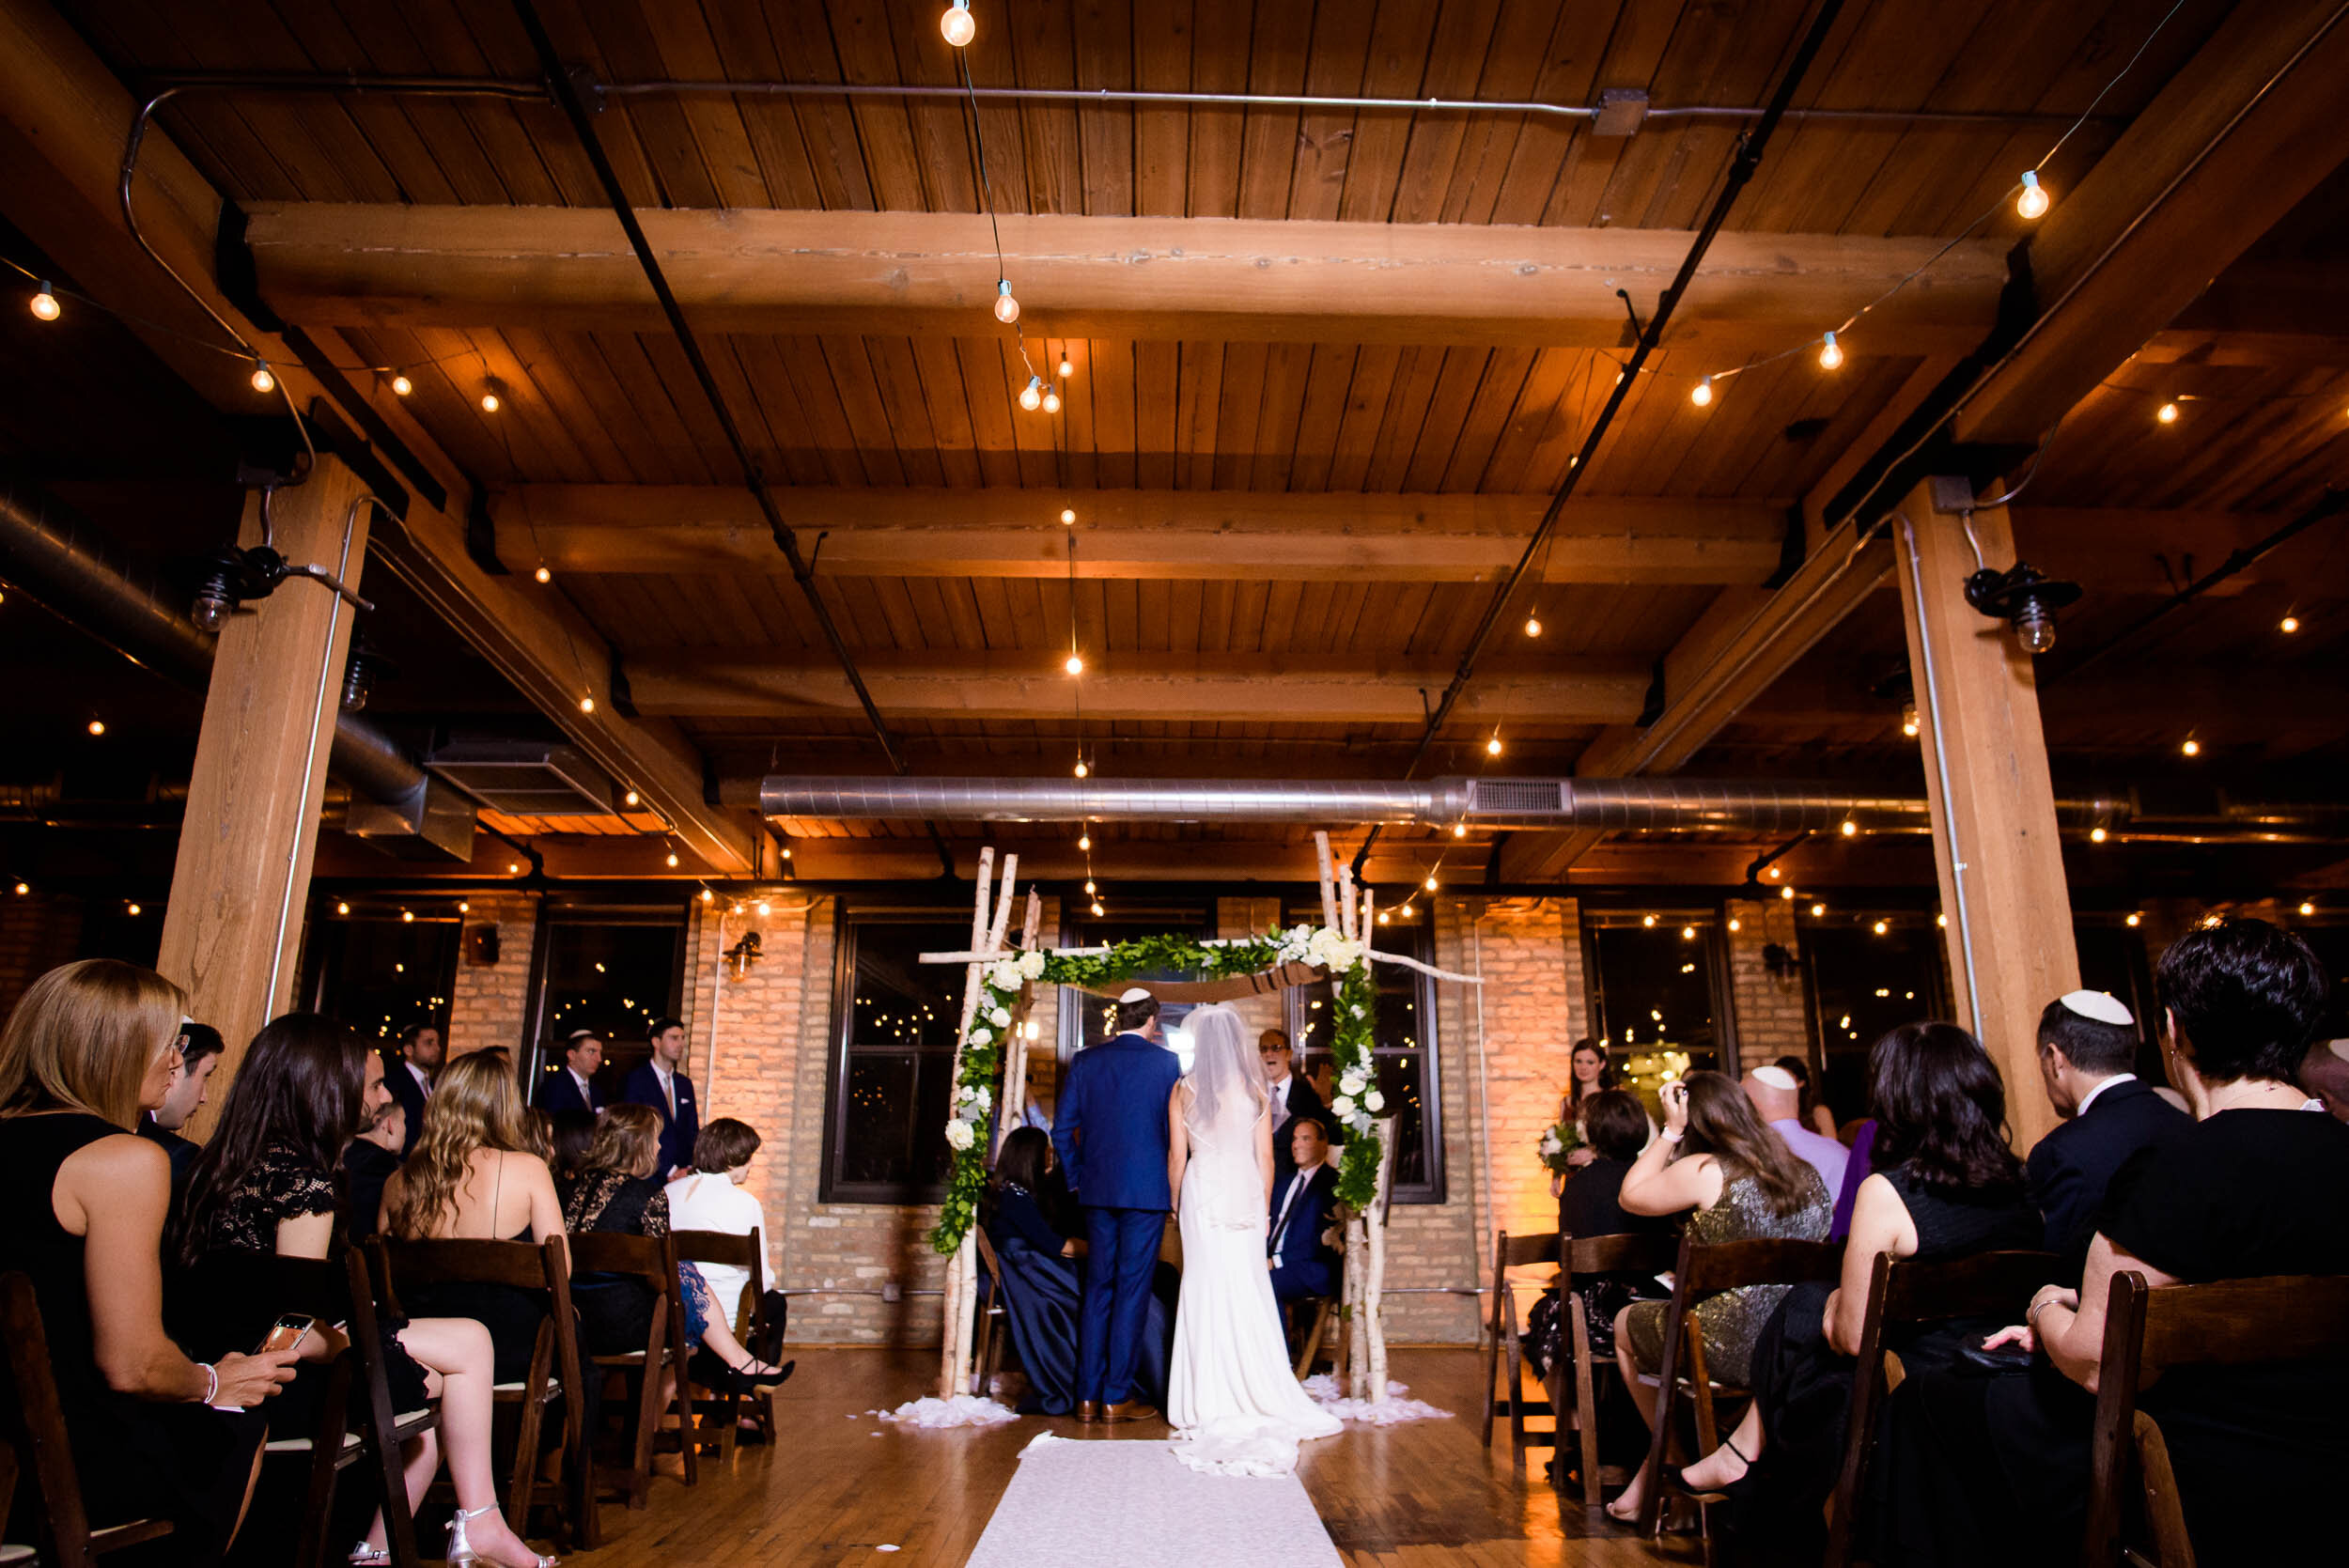 Jewish ceremony photo: Ravenswood Event Center Chicago wedding captured by J. Brown Photography.  